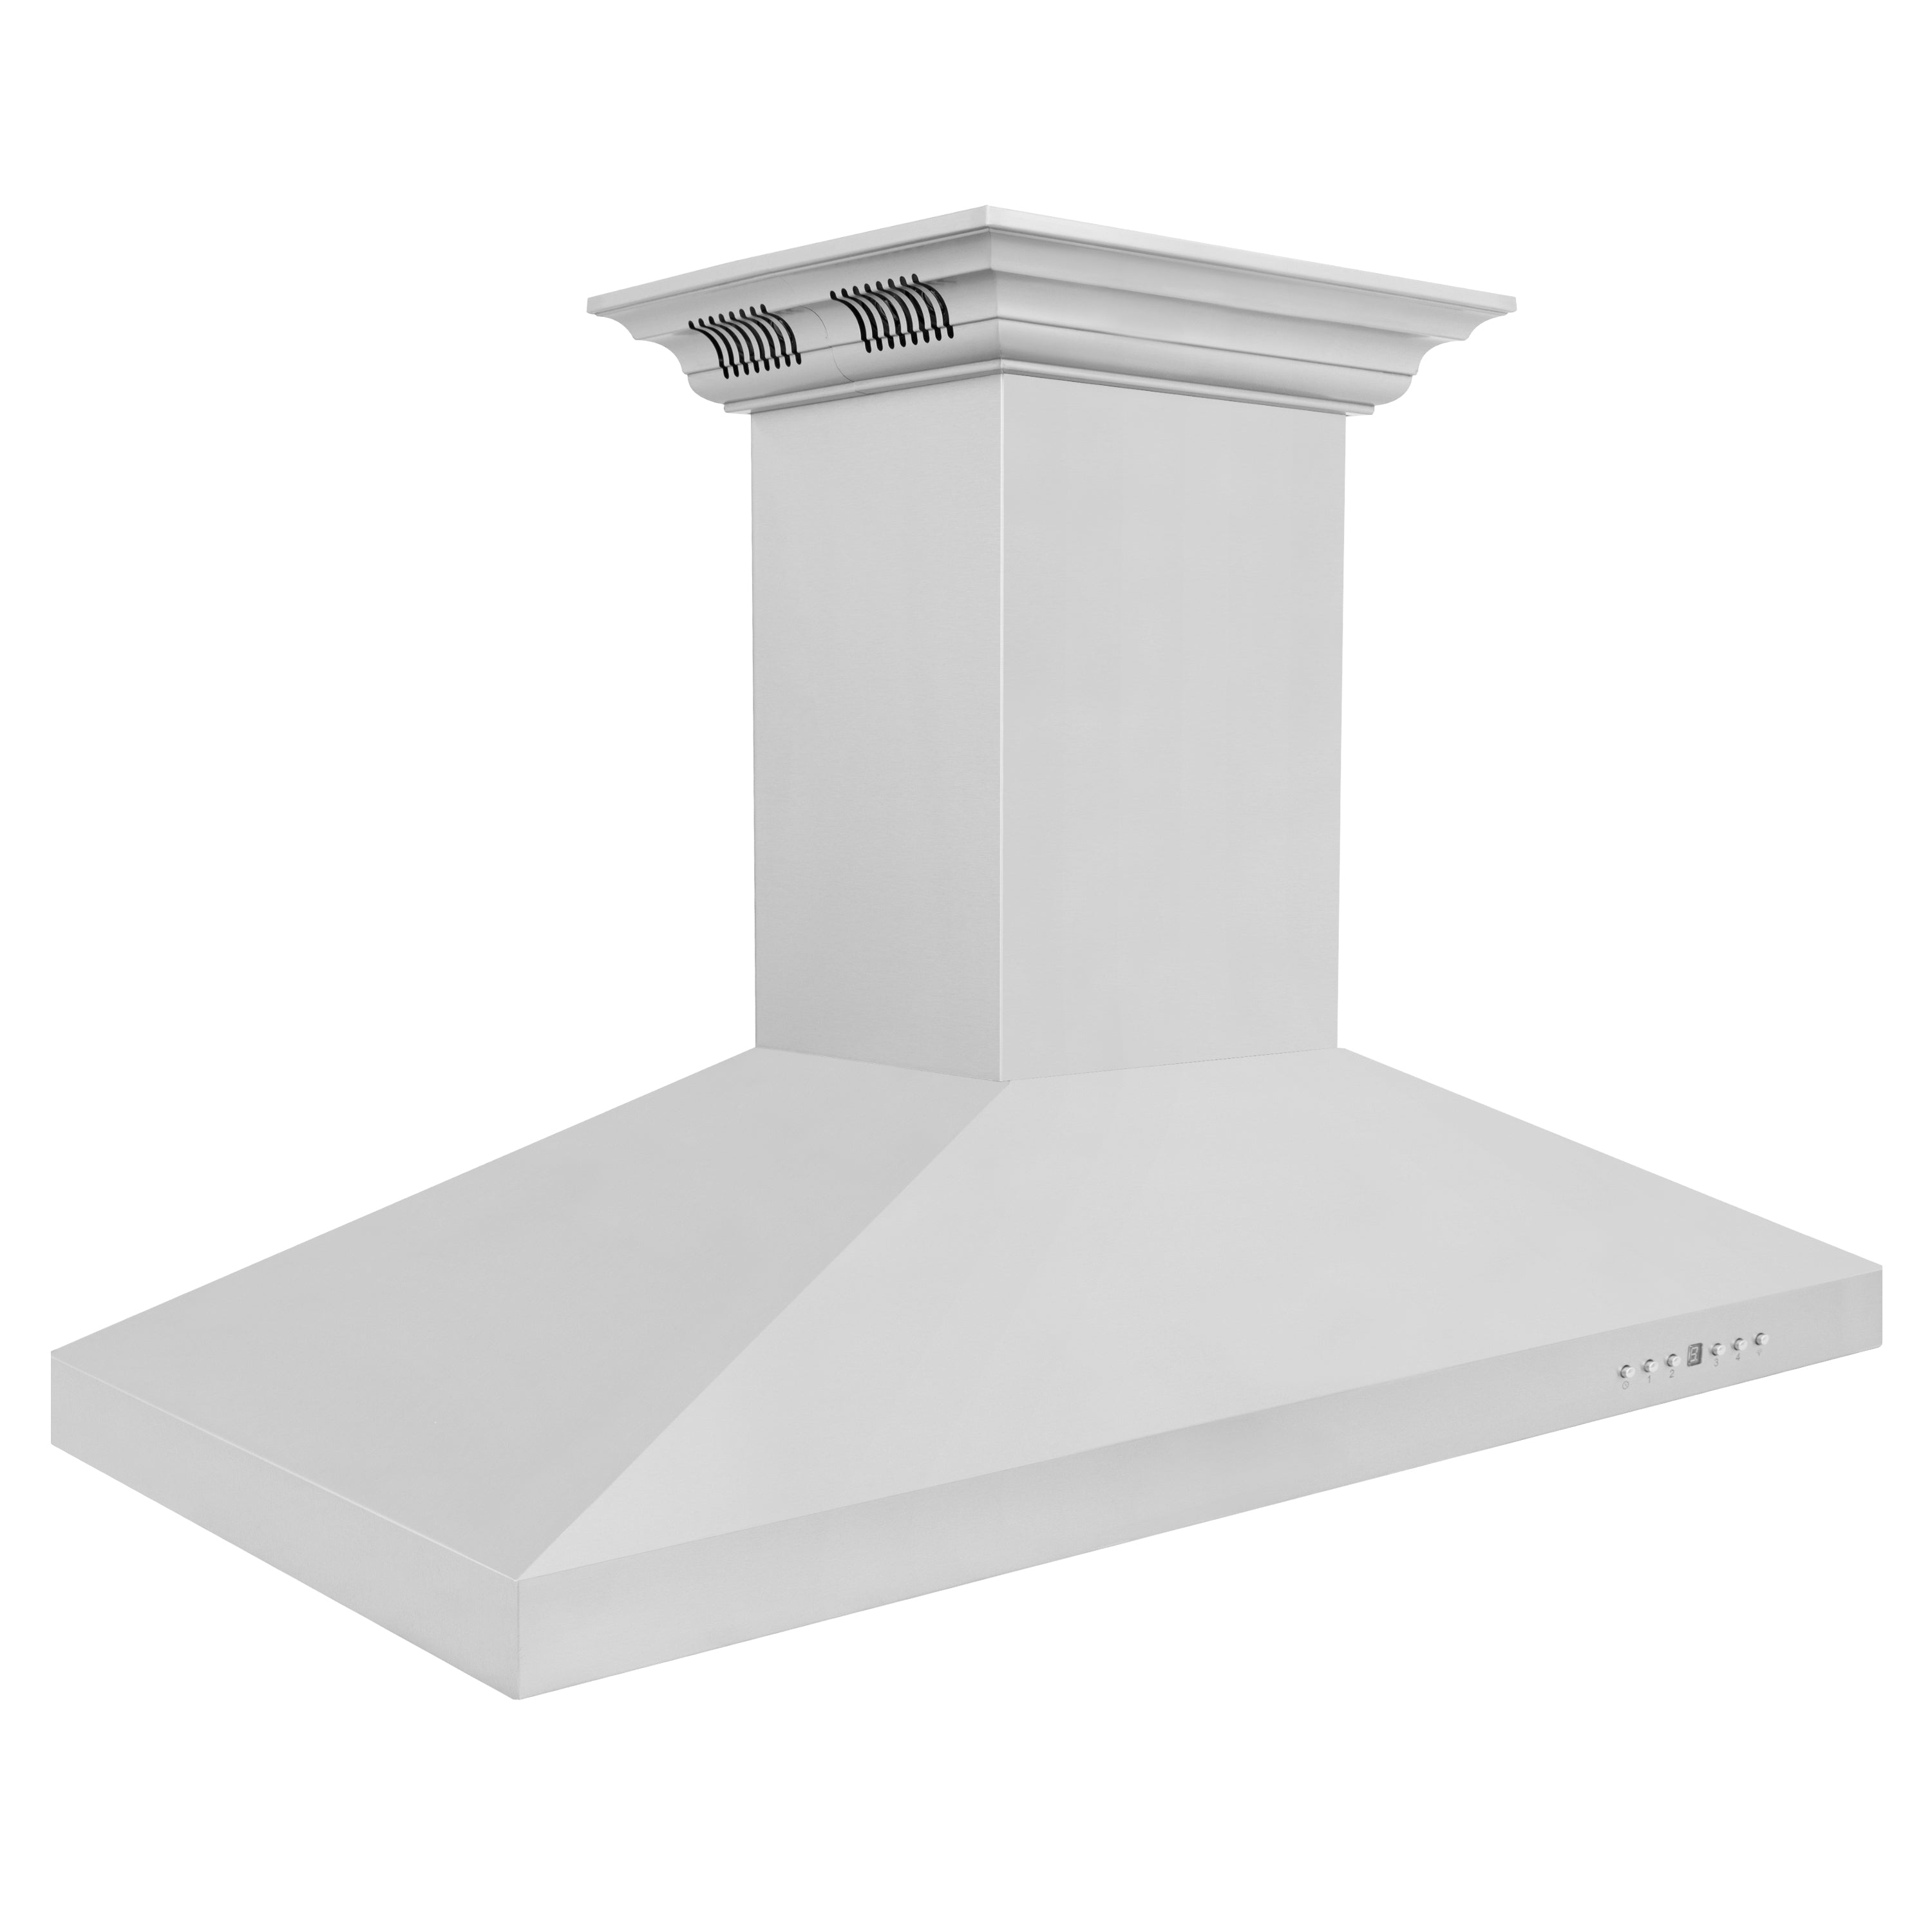 48" ZLINE CrownSound‚ Ducted Vent Island Mount Range Hood in Stainless Steel with Built-in Bluetooth Speakers (KL3iCRN-BT-48)